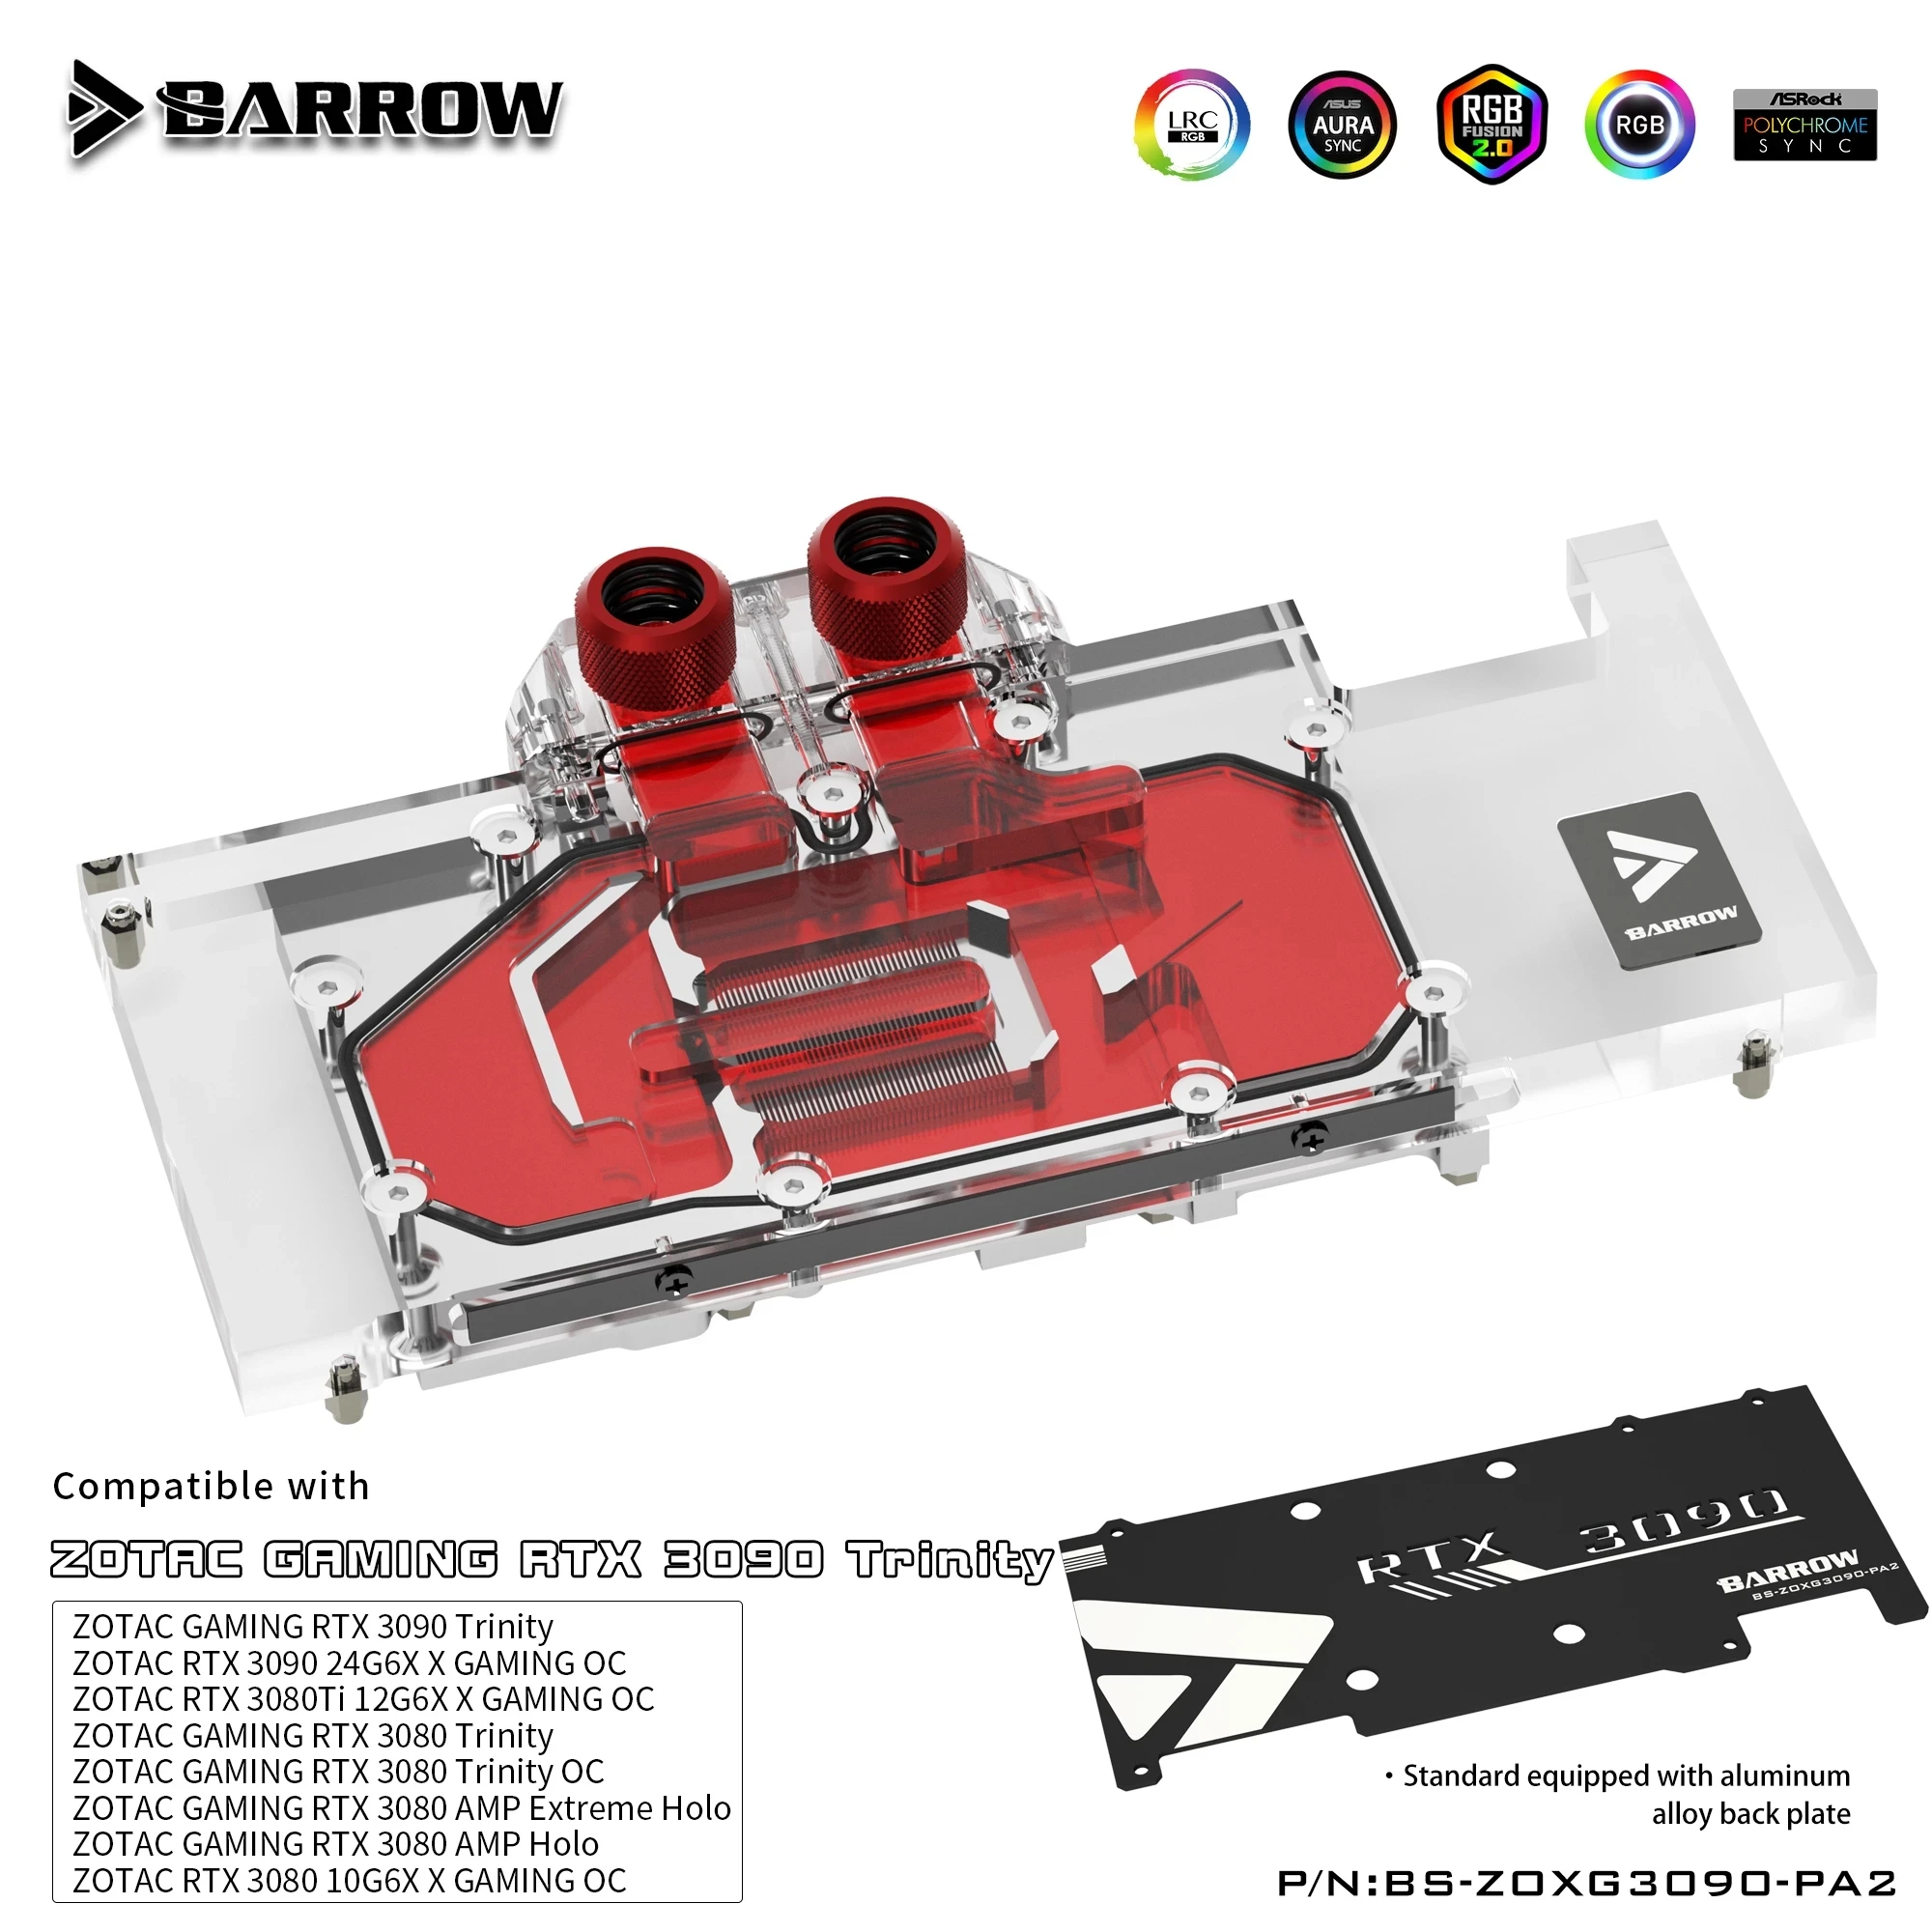 BARROW Full Coverage Water Block Use for ZOTAC GAMING RTX 3090 X/3080 TI AMP Trinlty GPU Card Support Backplate BS-ZOXG3090-PA2